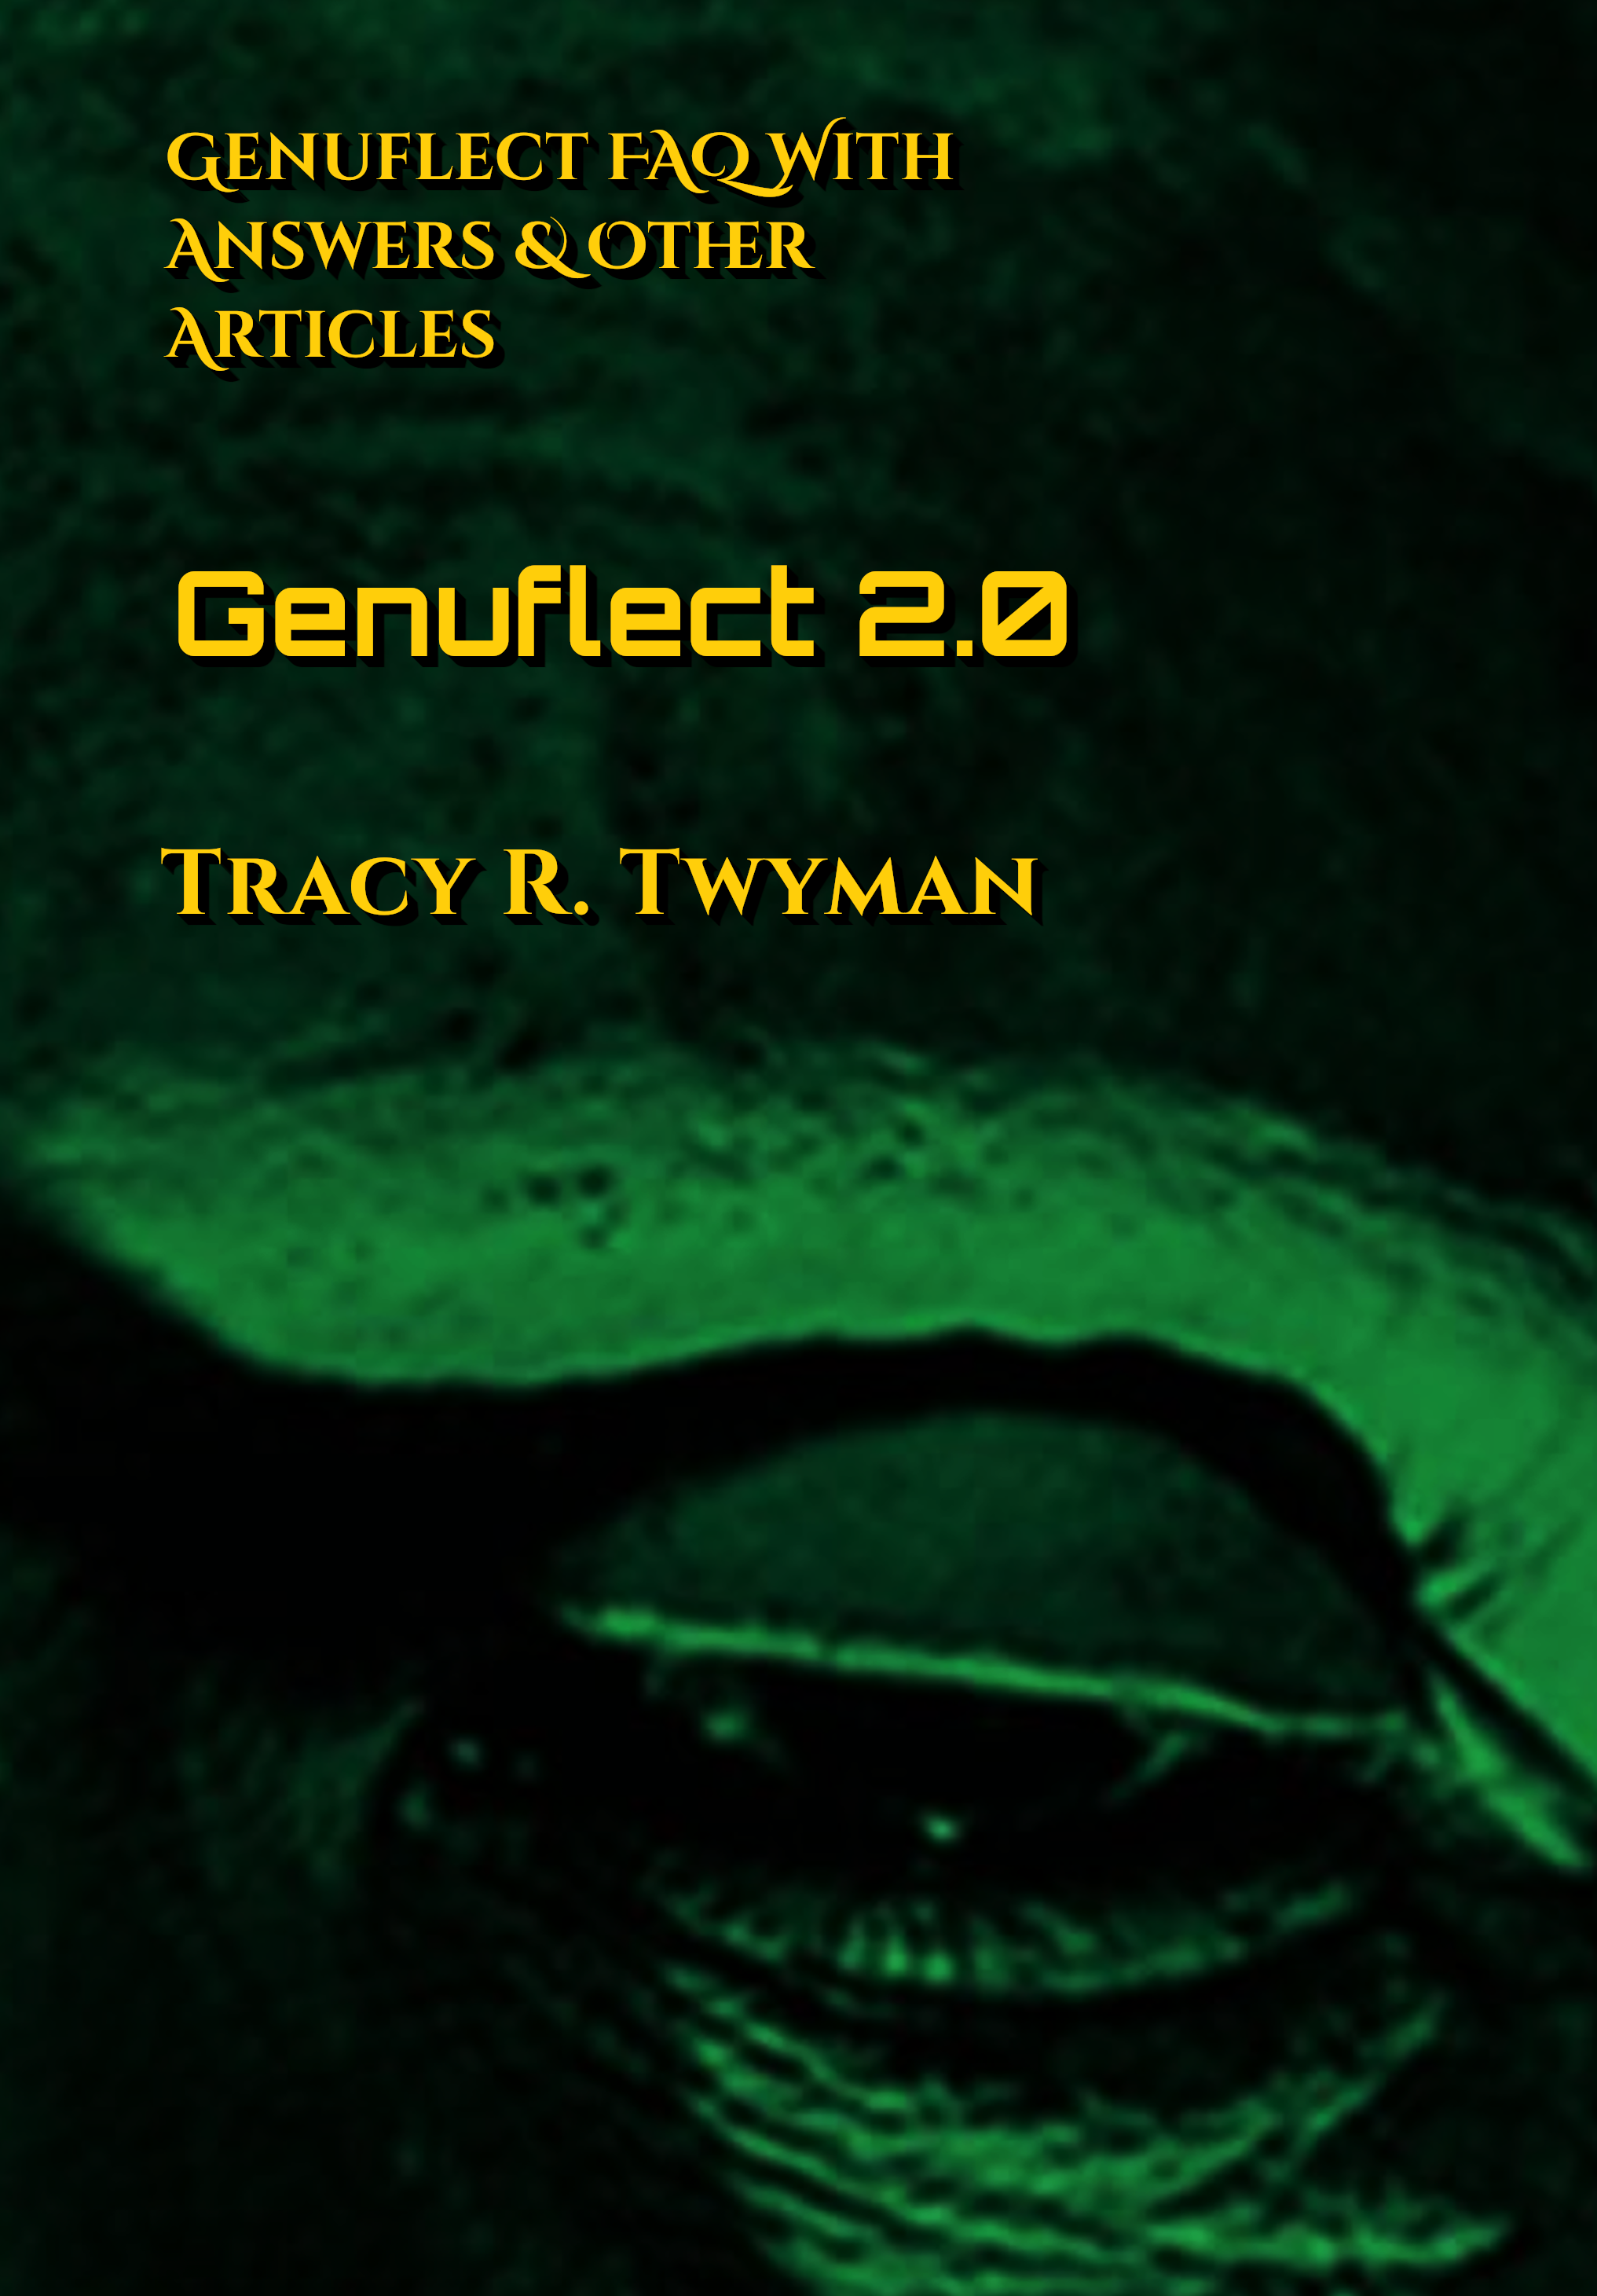 Book Cover Front: Genuflect 2.0: Genuflect FAQ With Answers by Tracy Twyman